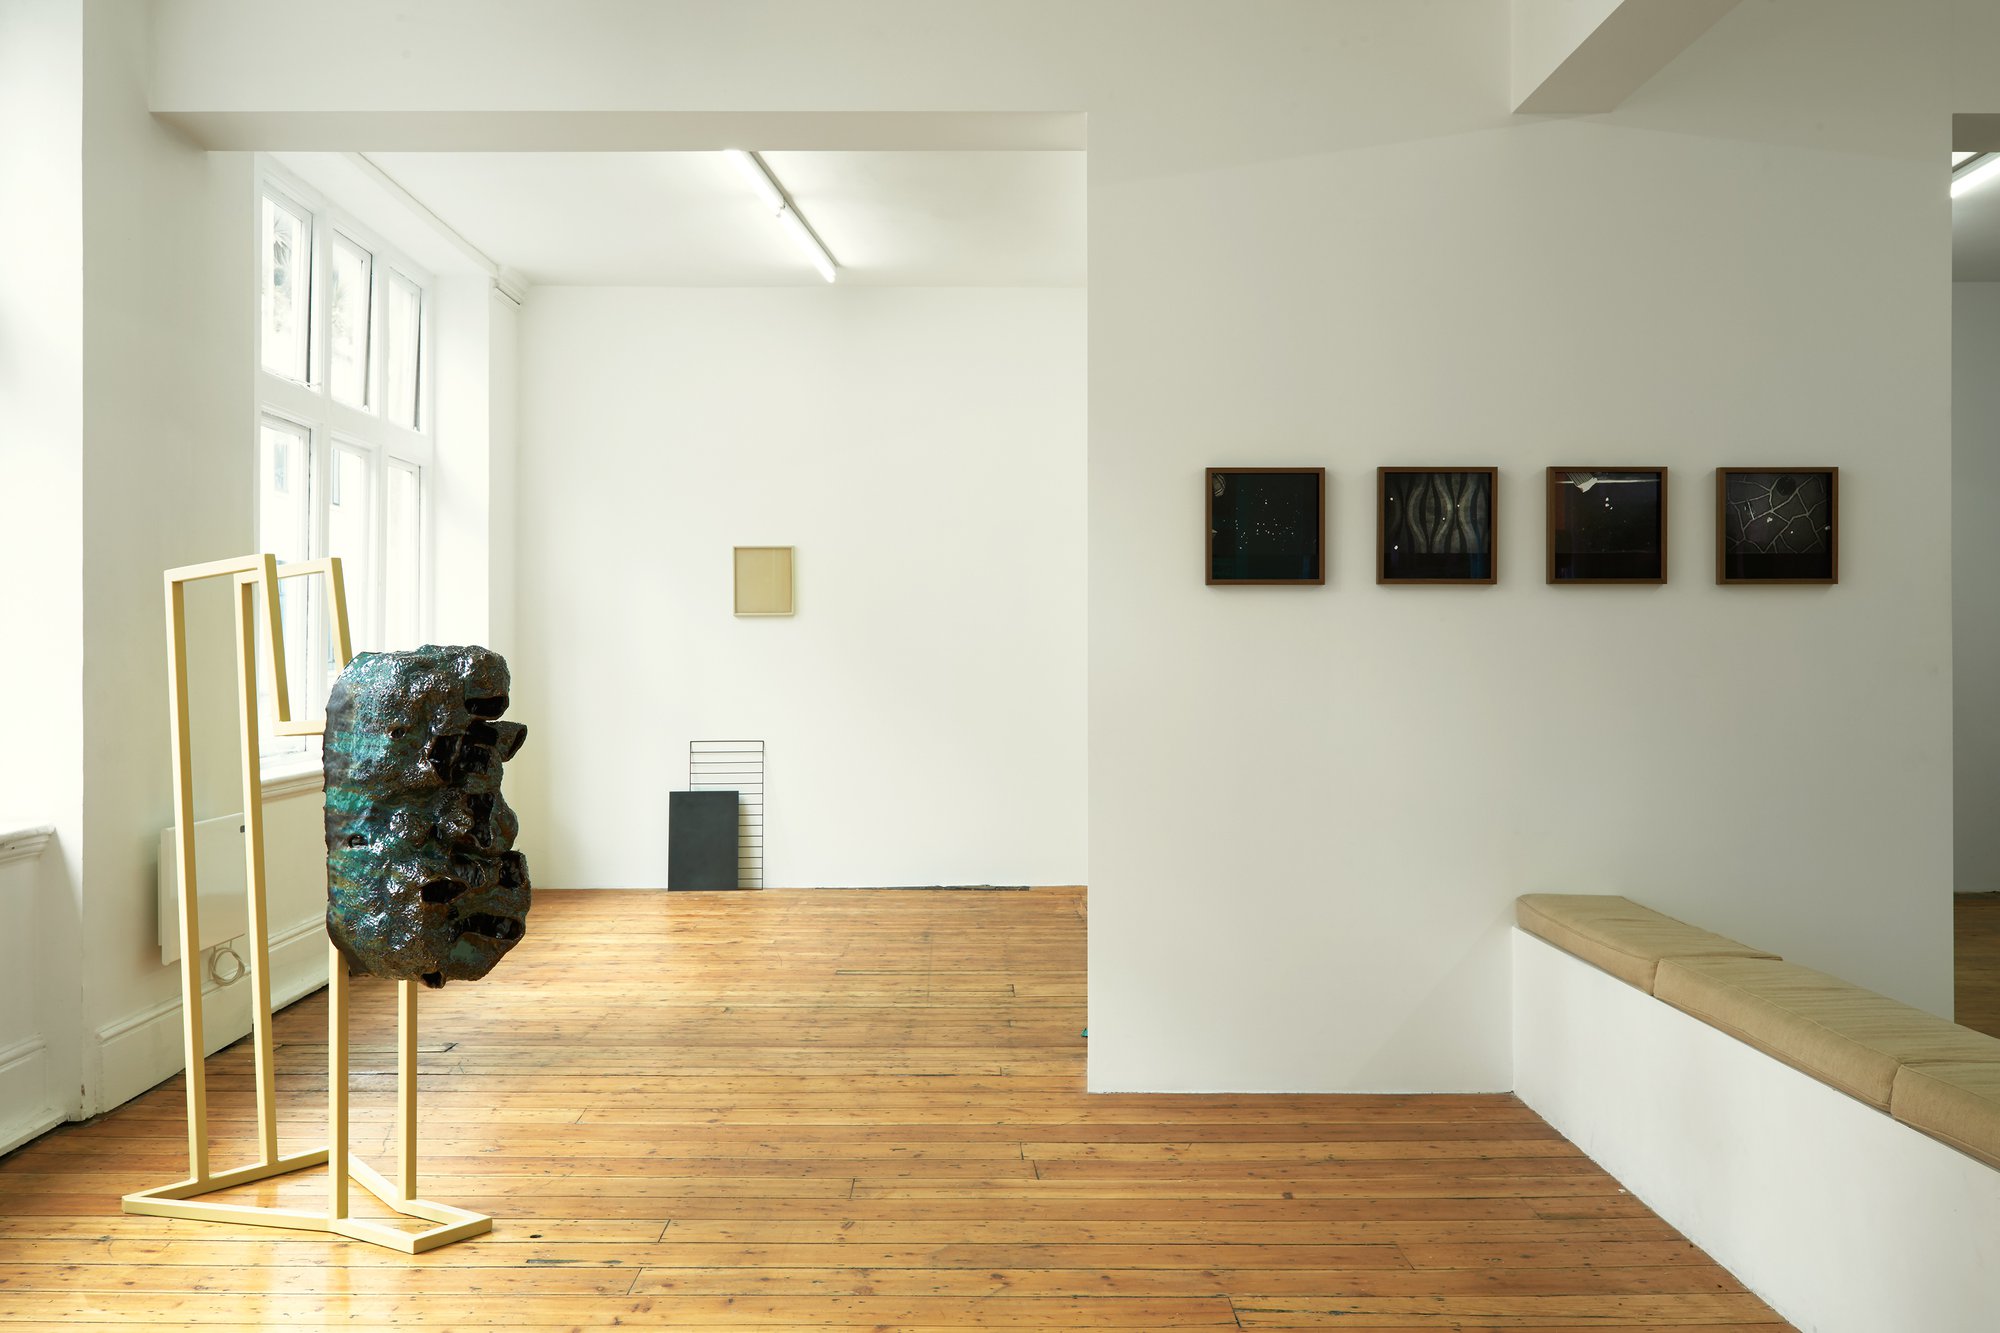 Installation view, The Chicken and The Egg, The Chicken, Rodeo, London, 2015